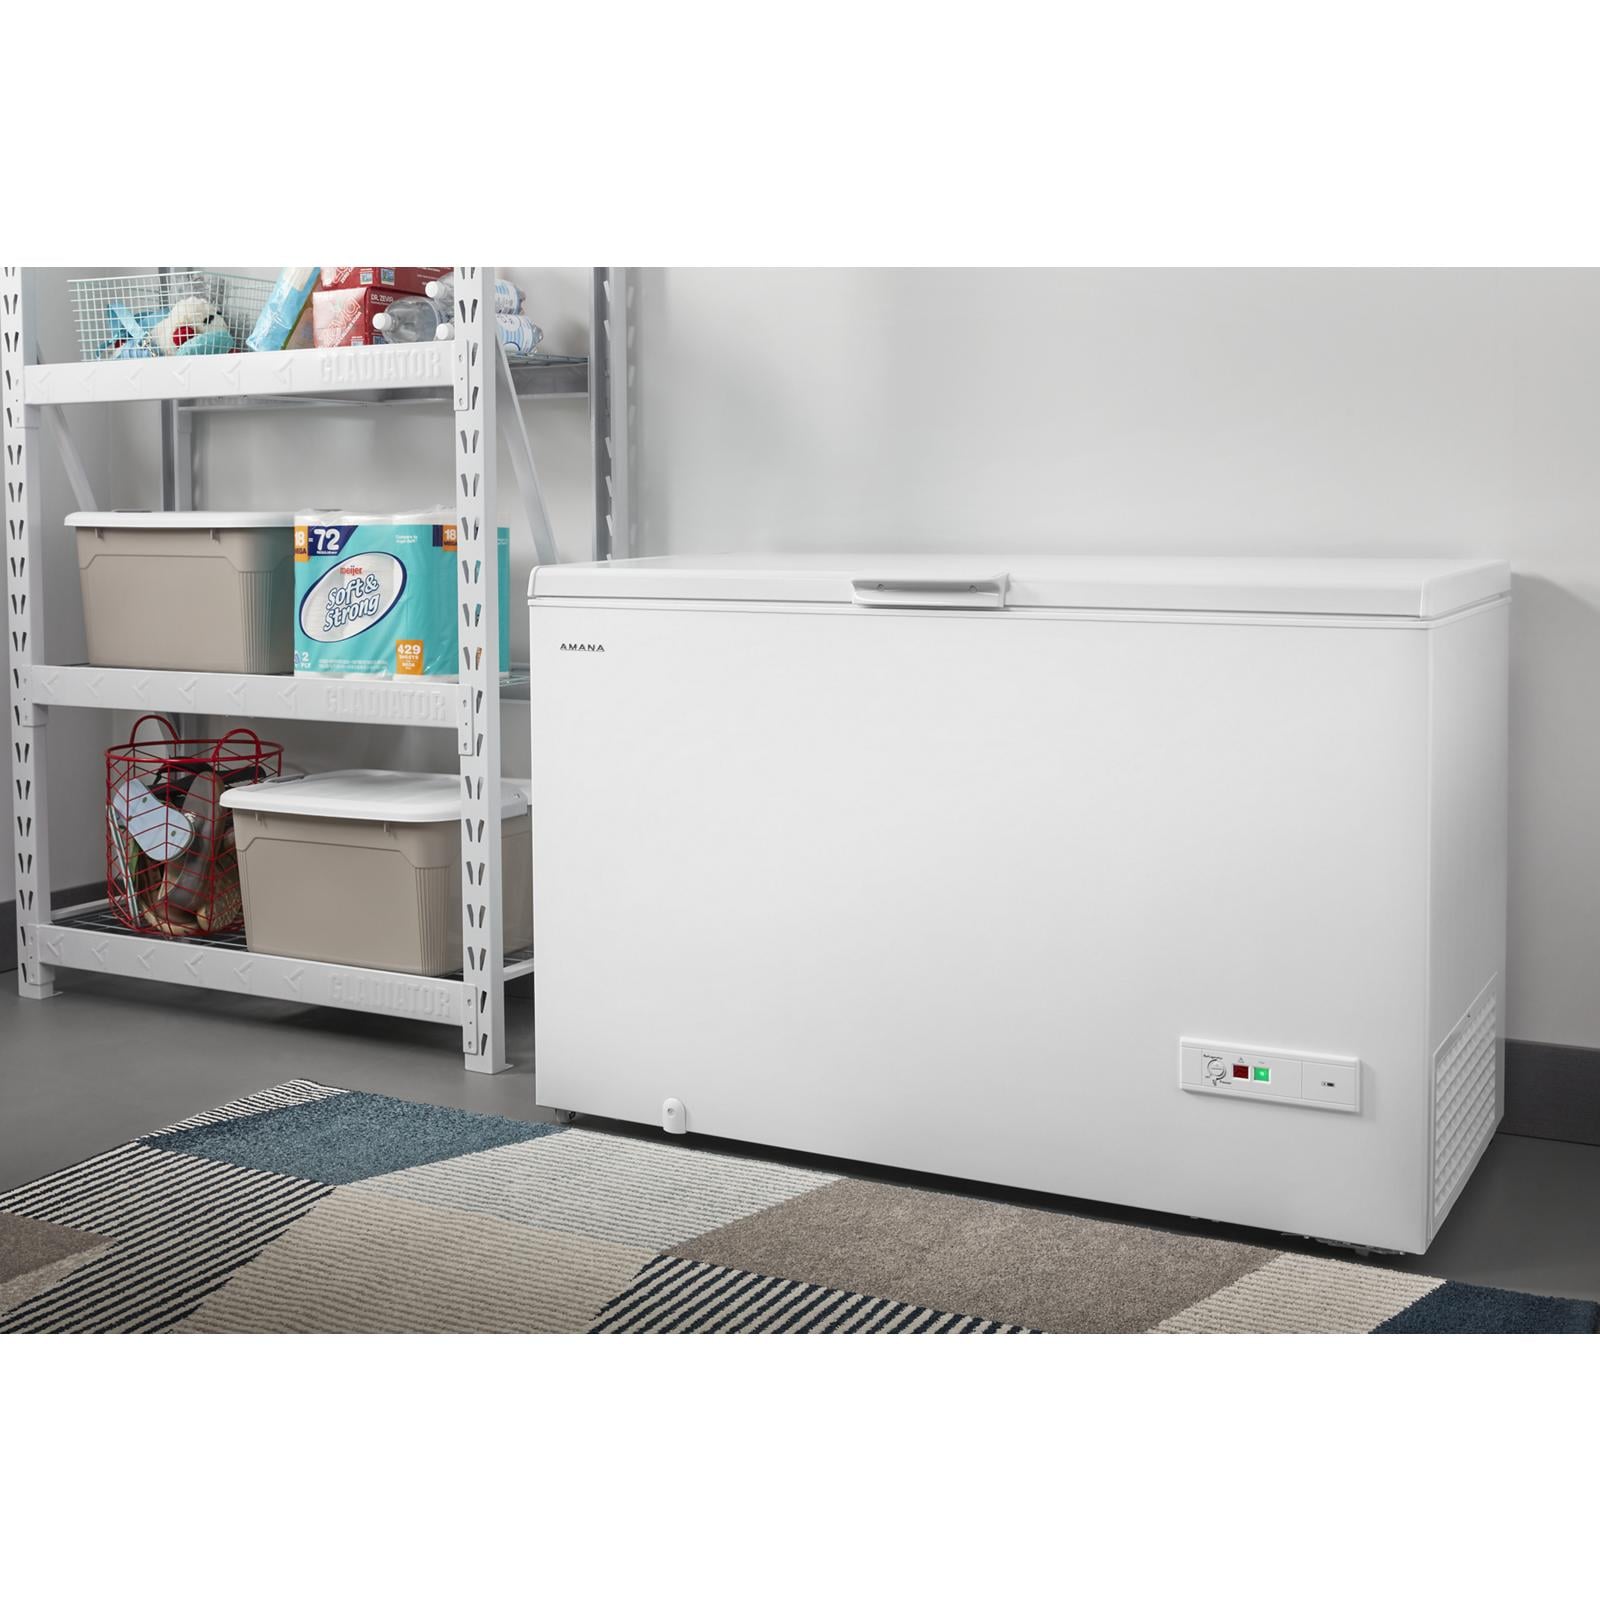 Amana - AQC0701GRW - 7.0 Cu. Ft. Compact Freezer with 1 Basket  Amana  AQC0701GRW Chest Freezer - Voss TV & Appliance in Pittsburgh, PA